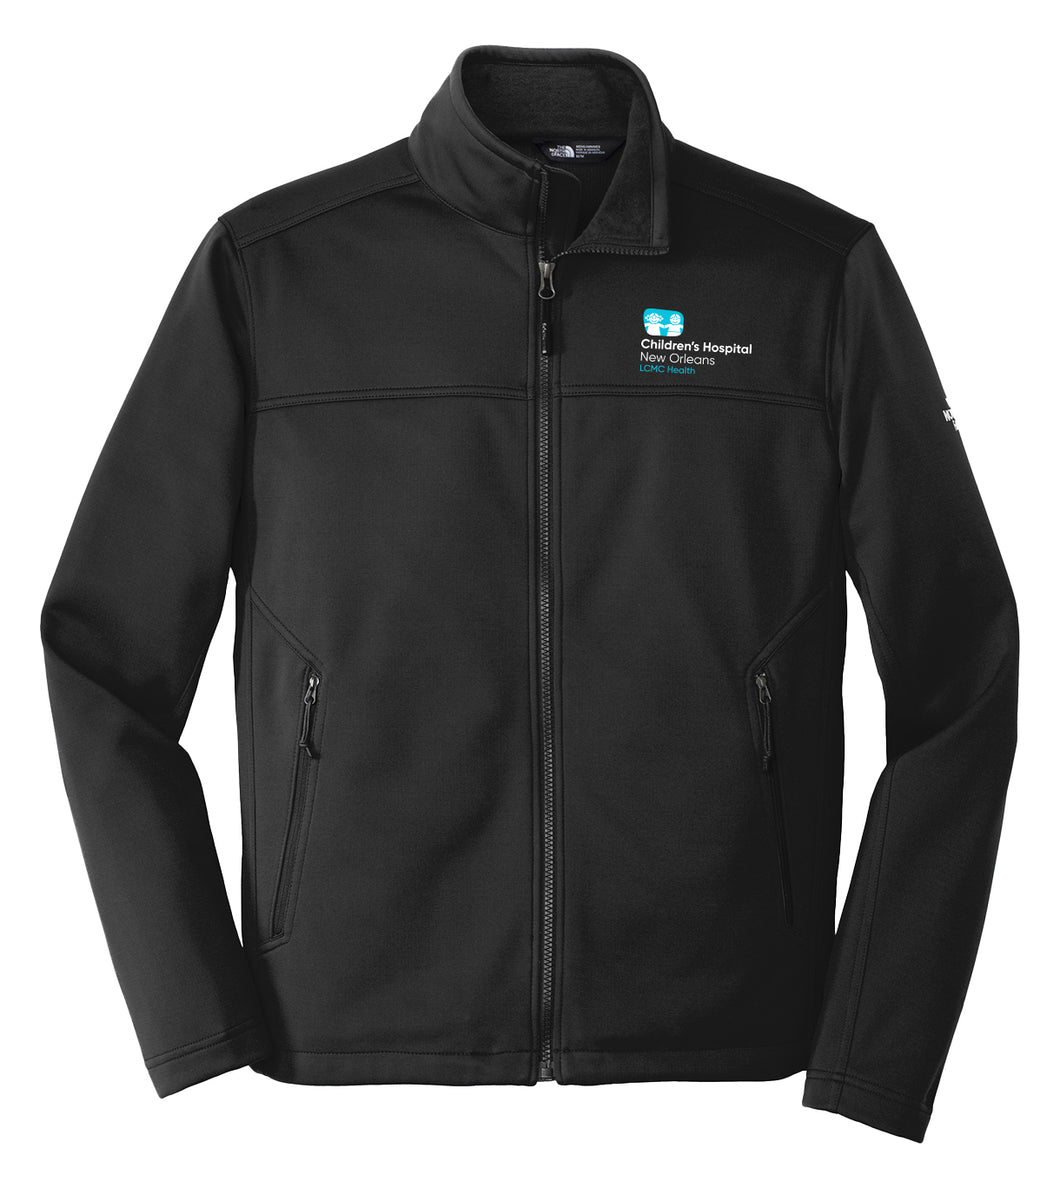 Children's Hospital Personal Item The North Face® Ridgewall Soft Shell Jacket with Embroidered Logo